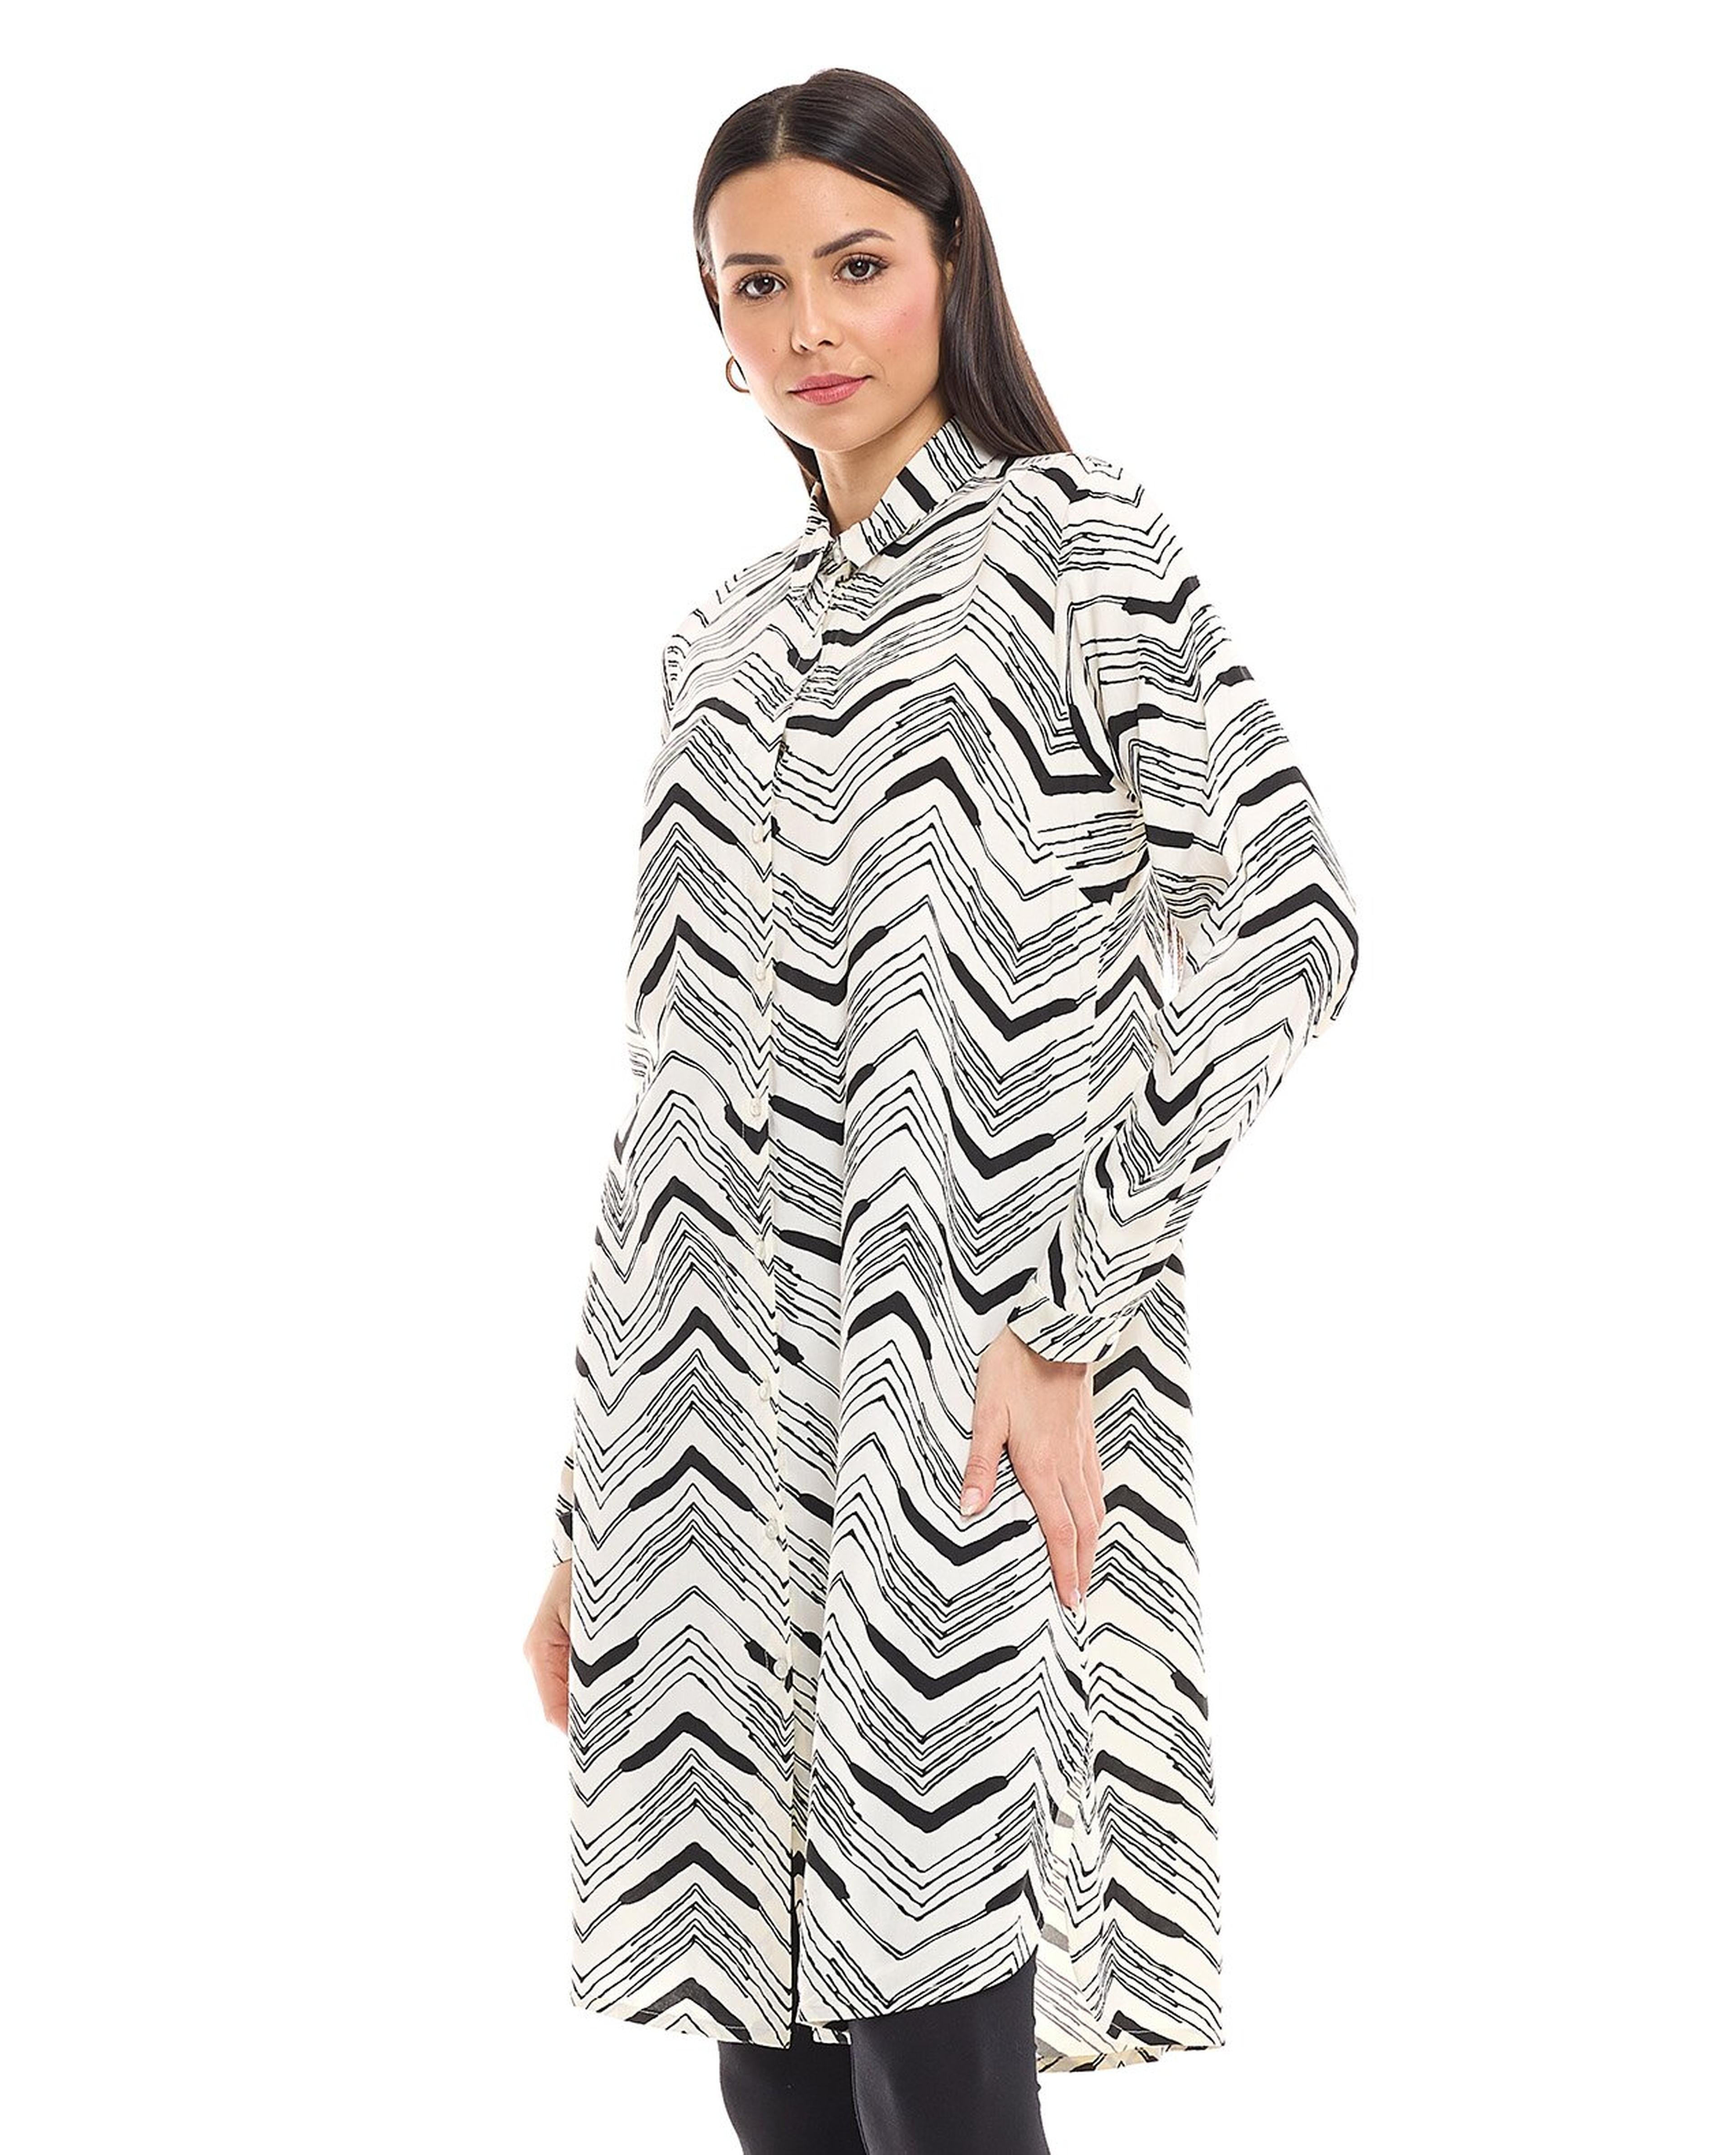 Chevron Patterned Tunic with Shirt Collar and Long Sleeves